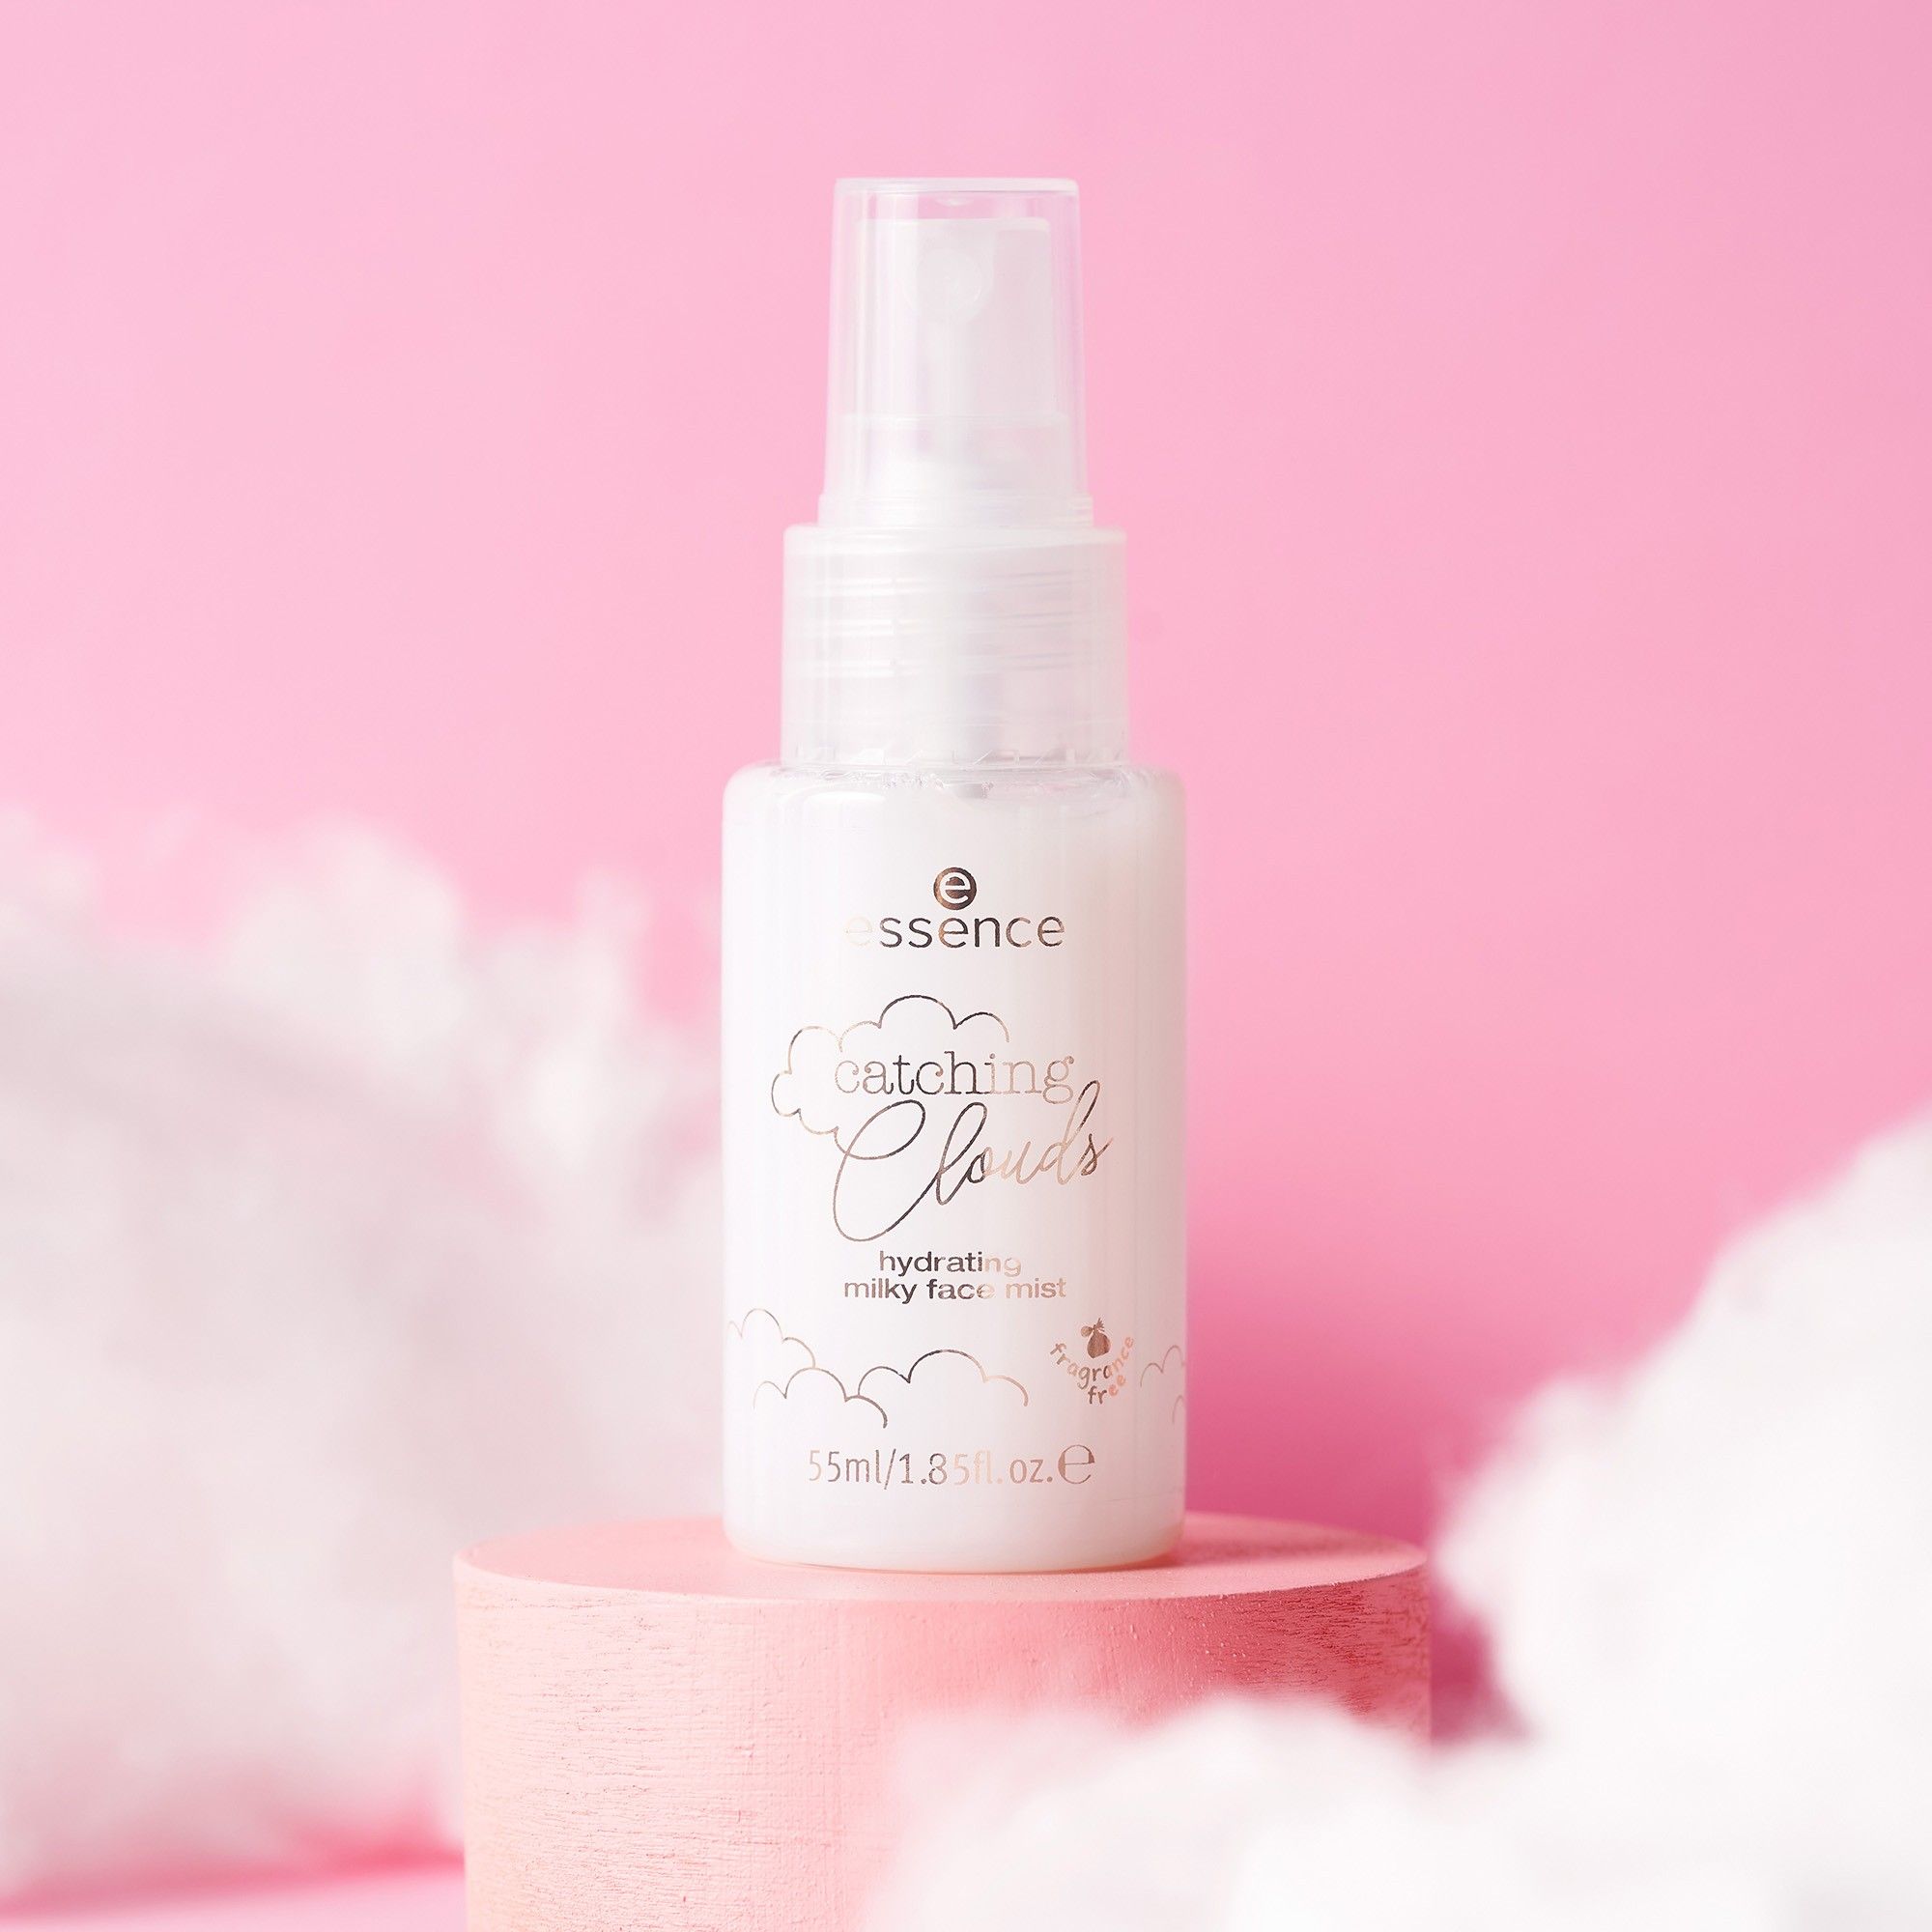 Catching Clouds - Hydrating Milky Face Mist